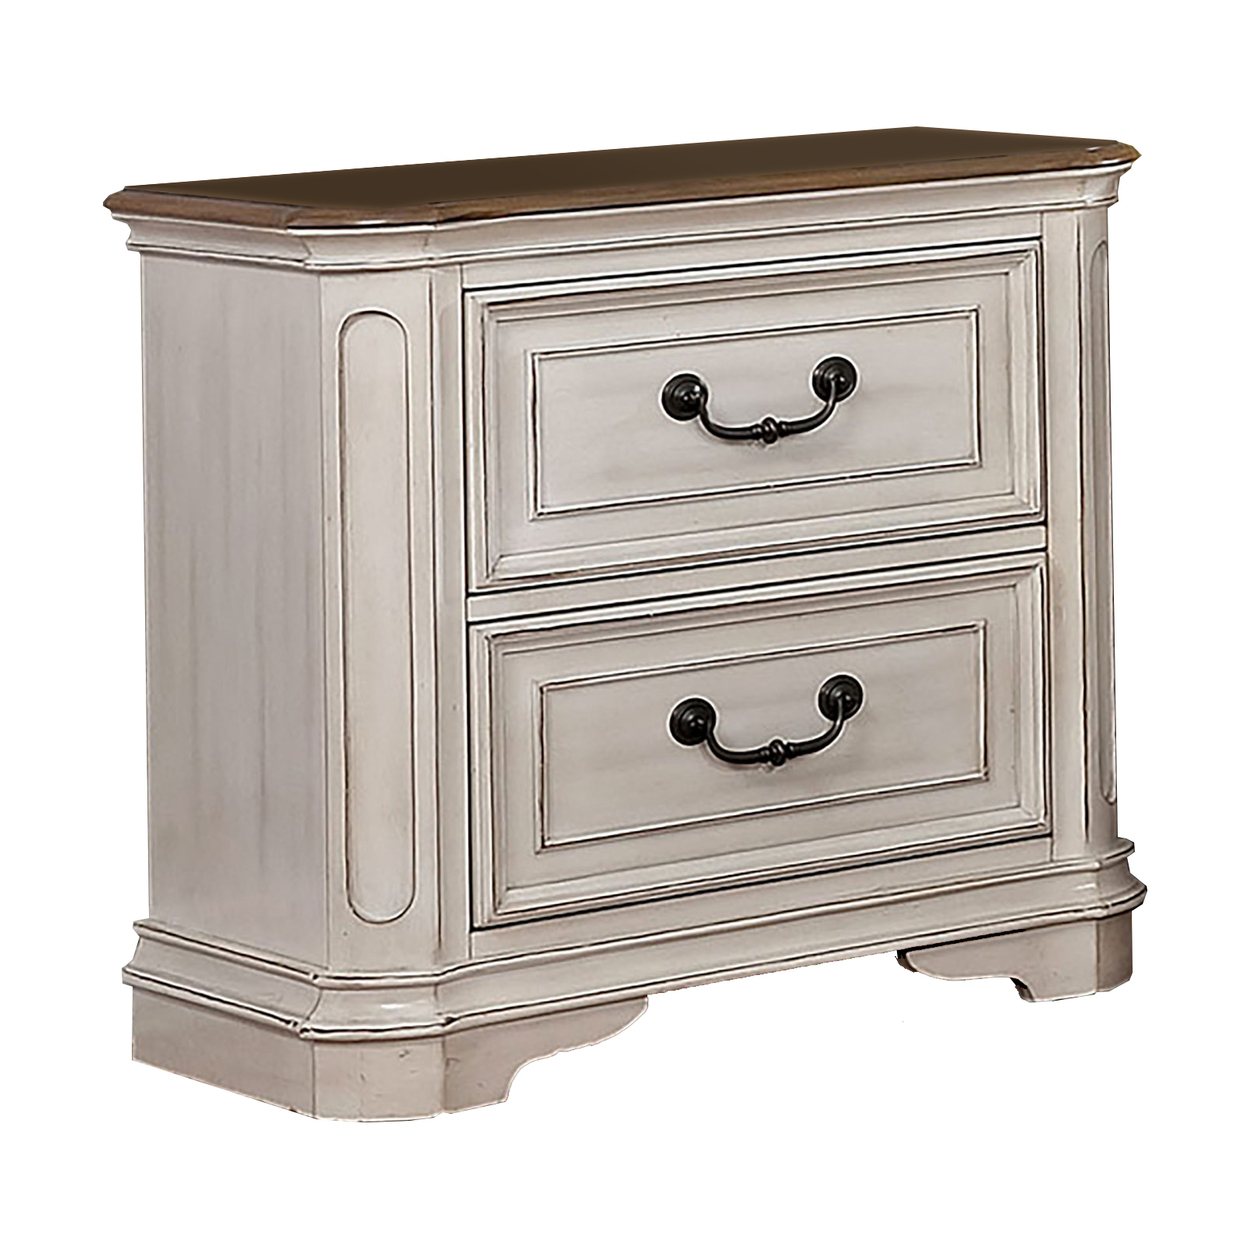 Transitional Wooden Nightstand With 2 Drawers And Bracket Legs, White- Saltoro Sherpi